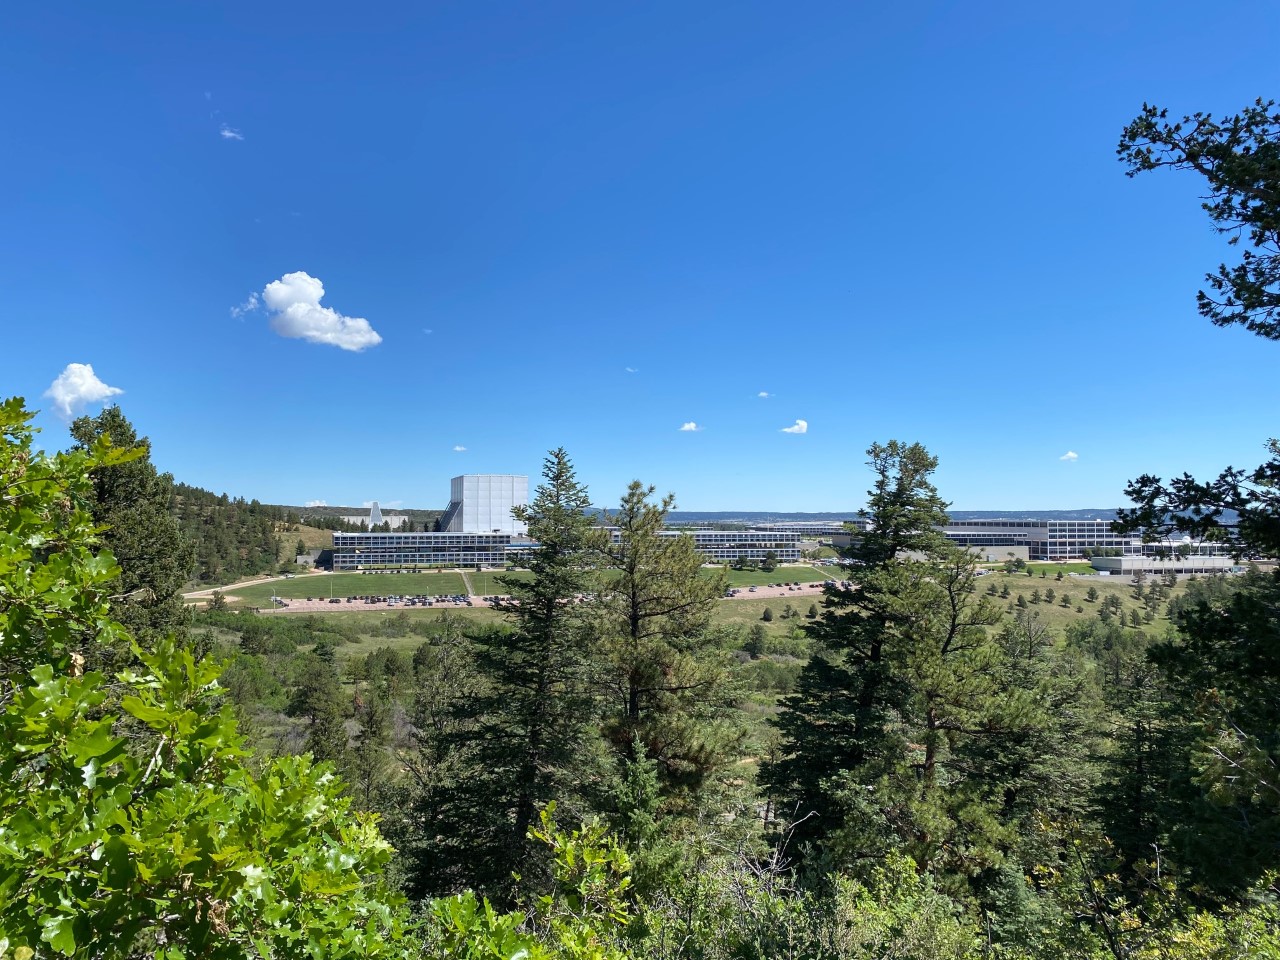 View of the US Air Force Academy from Chapel Viewpoint.